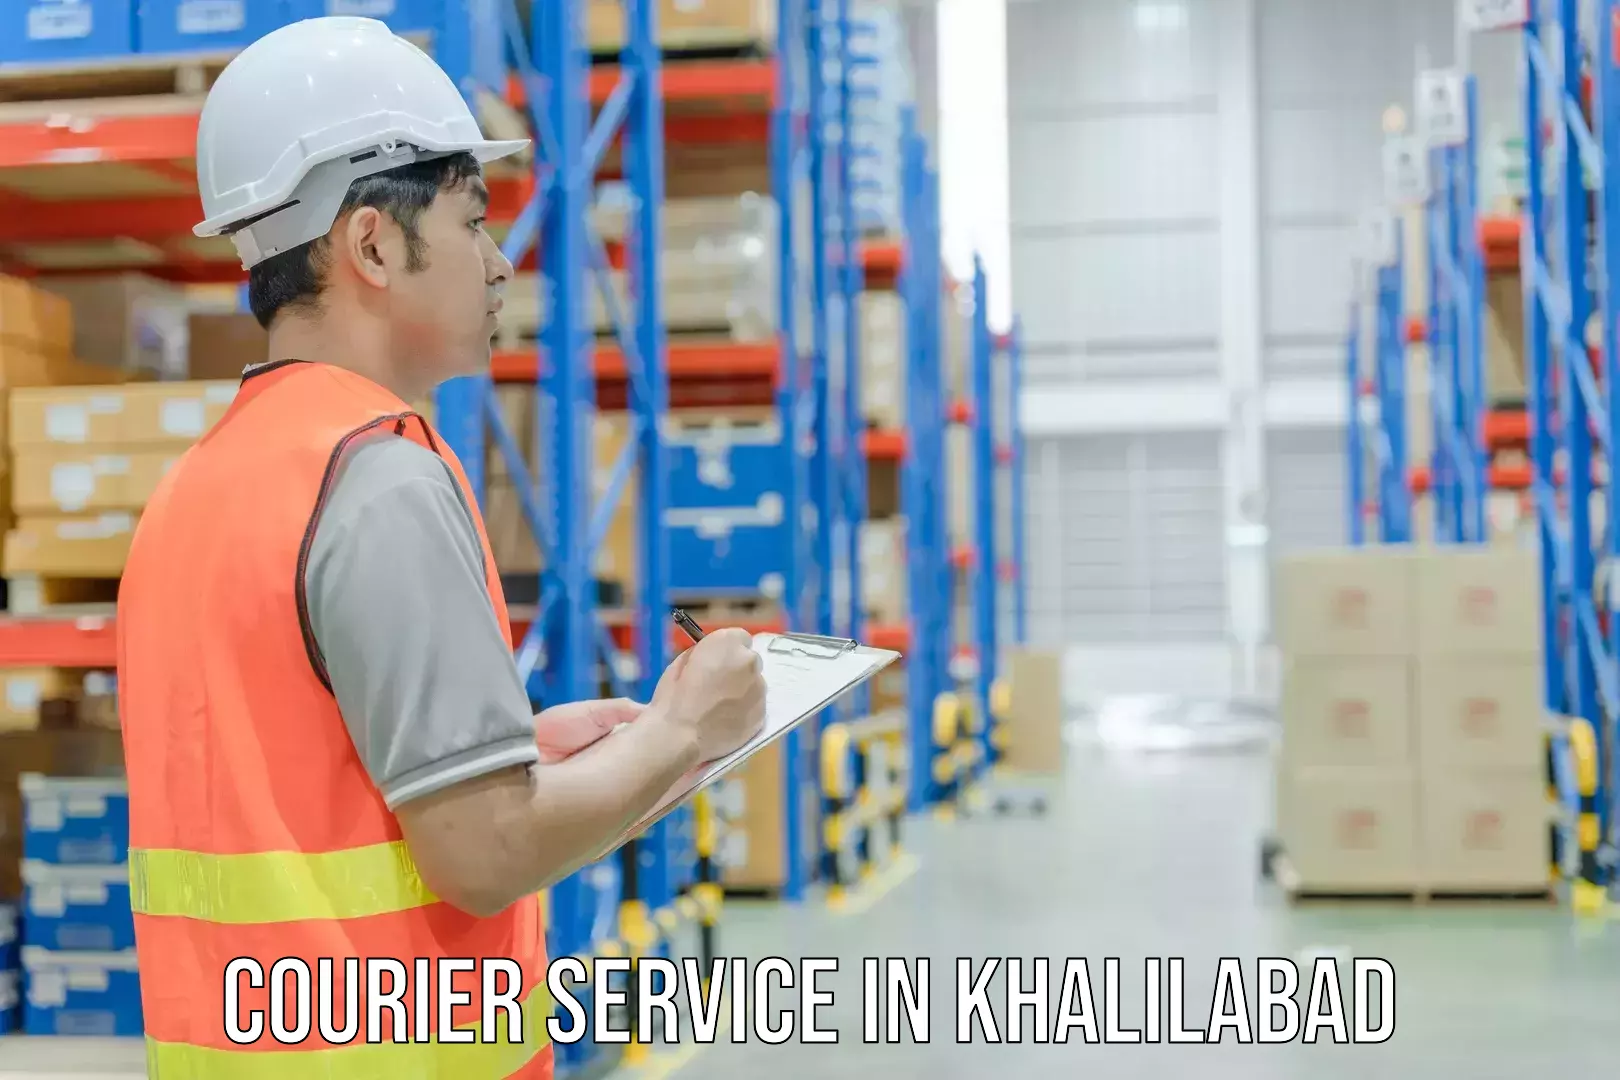 Customer-oriented courier services in Khalilabad